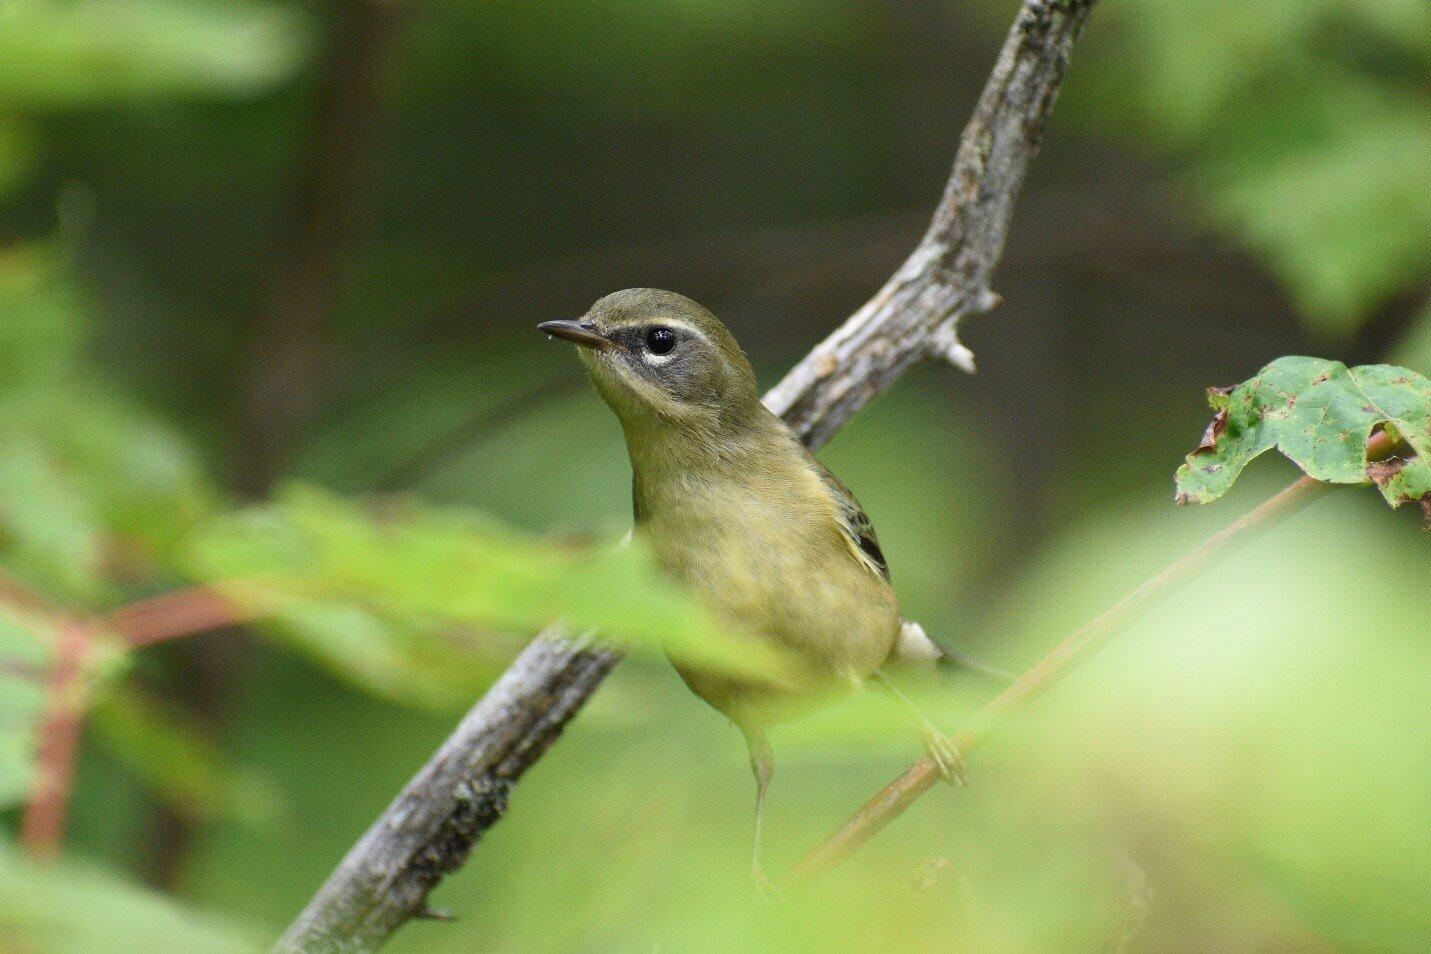 An alert female Black-throated Blue Warbler peers out from the underbrush at a passing intruder to her nesting territory.